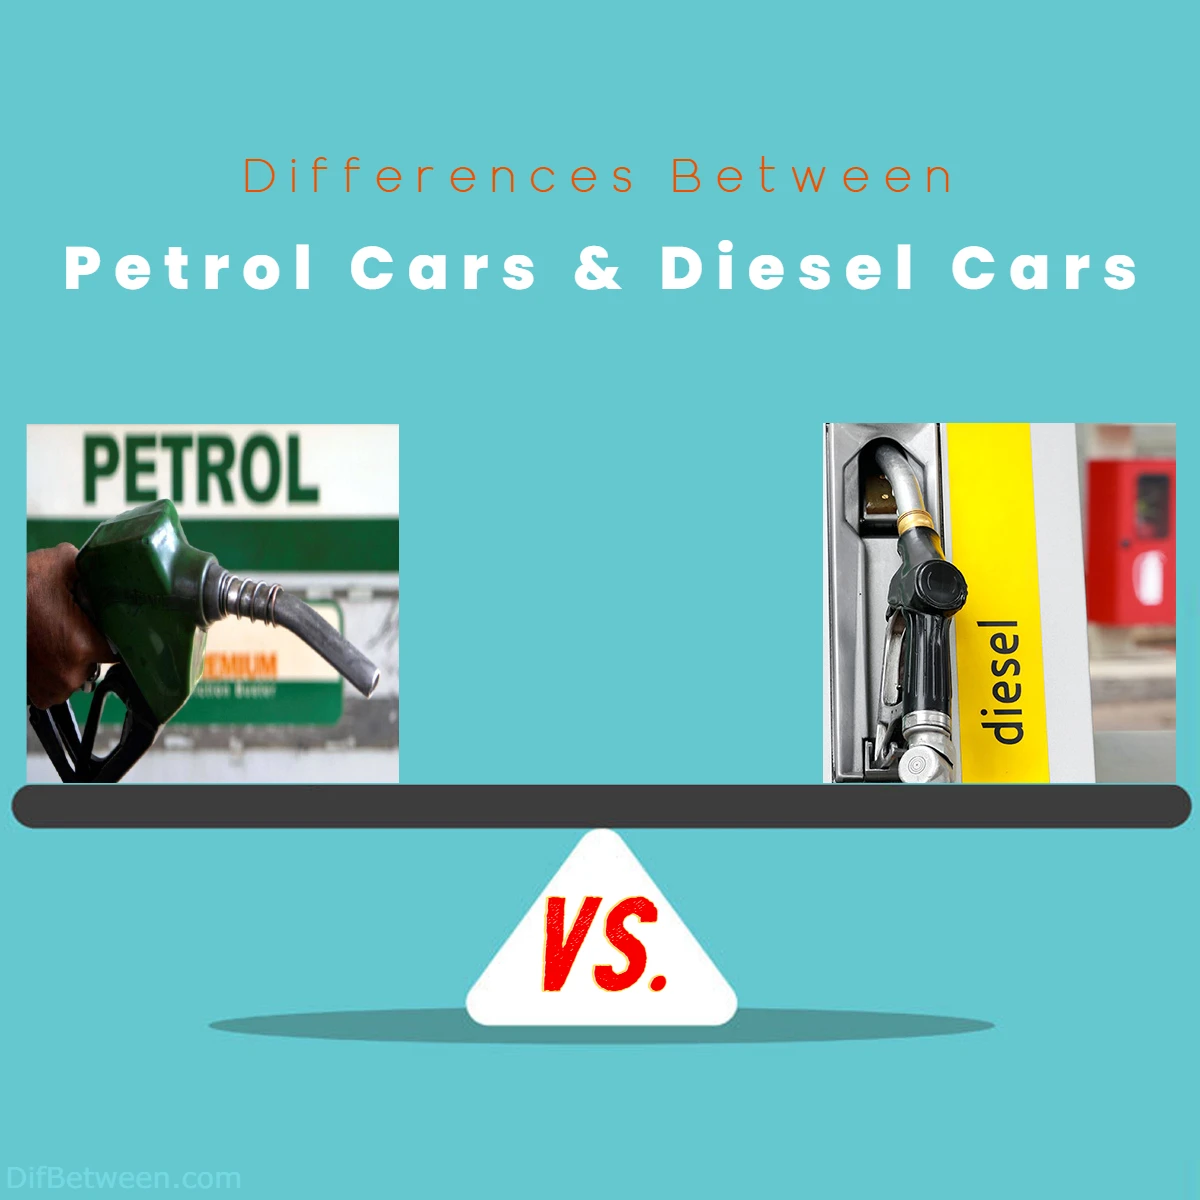 Differences Between Diesel Cars and Petrol Cars